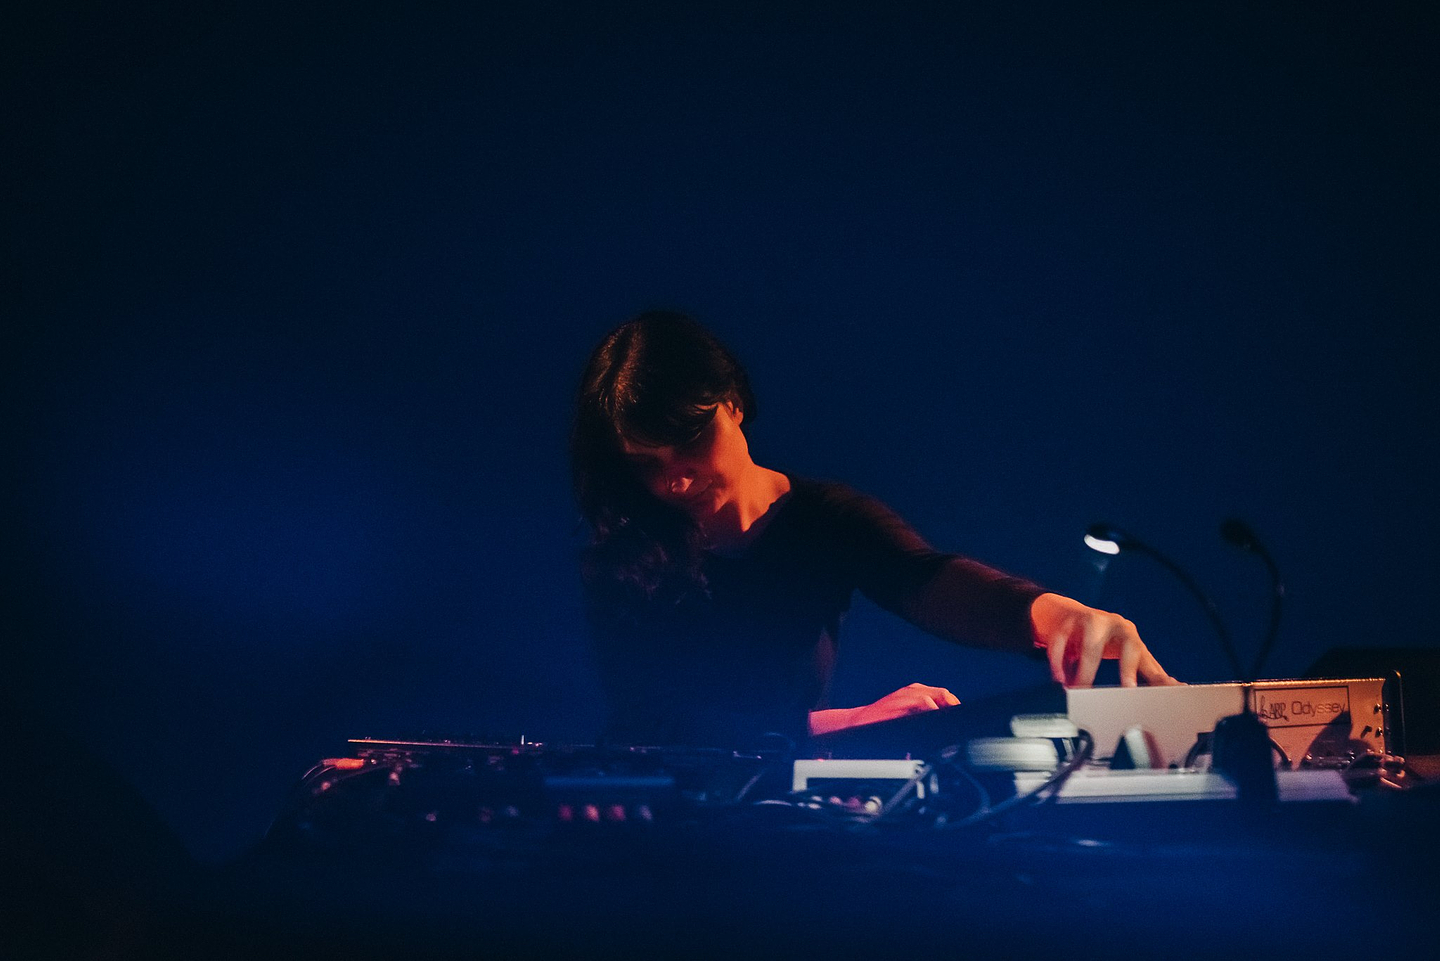 A woman wearing a dark coloured shirt is standing in front of an electronic music setup. Her left hand is adjusting a knob on a mixing station. She is faintly lit by a blue light.